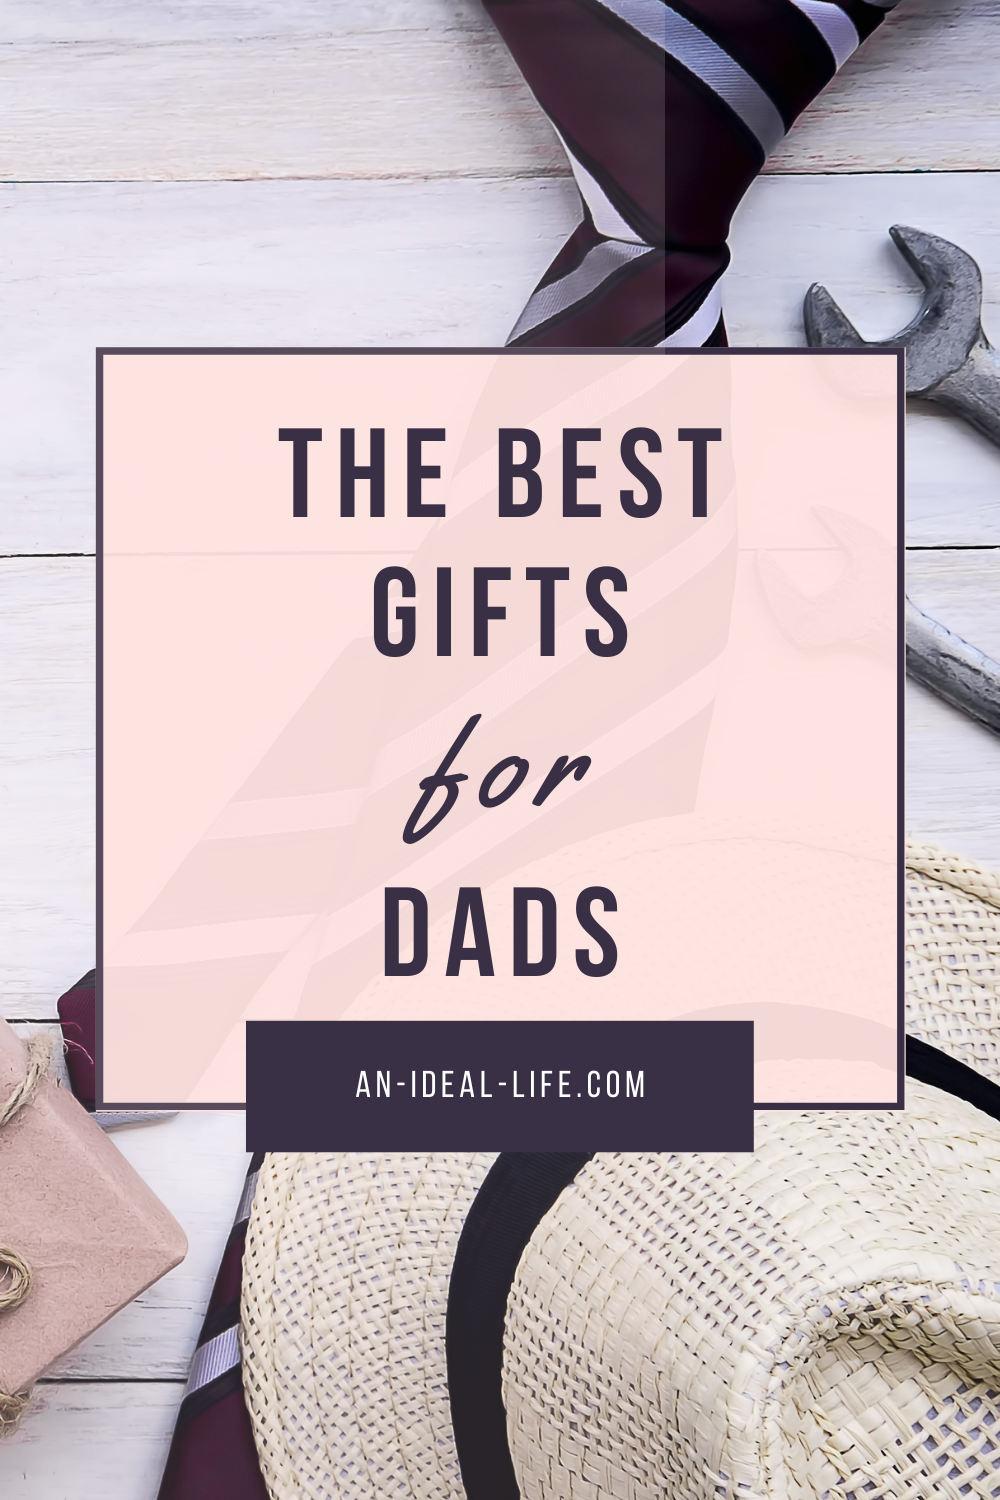 The Best Gifts for Dads